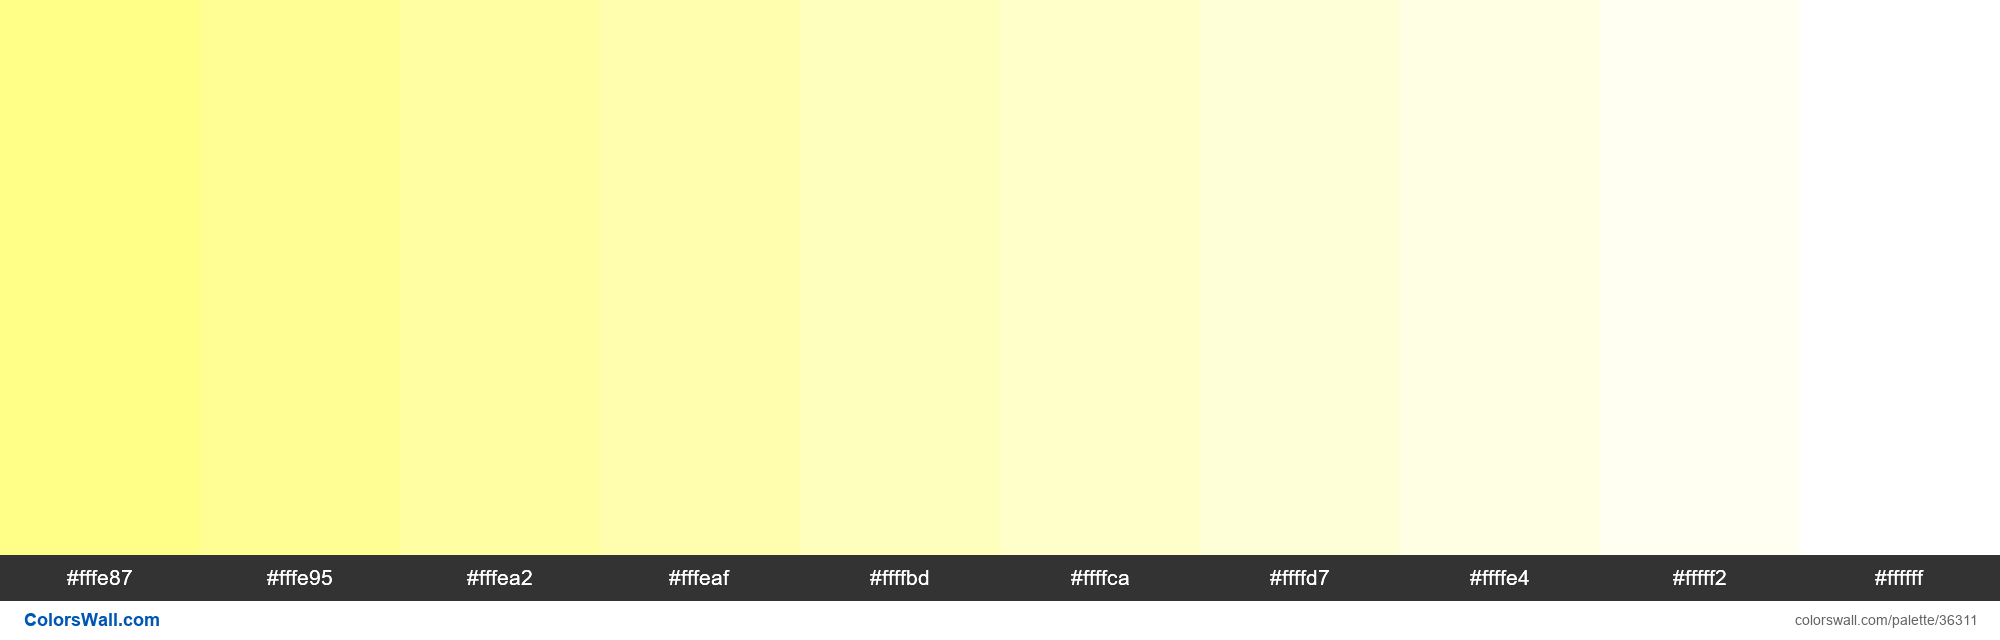 Tints XKCD Color light yellow #fffe7a hex colors ColorsWall